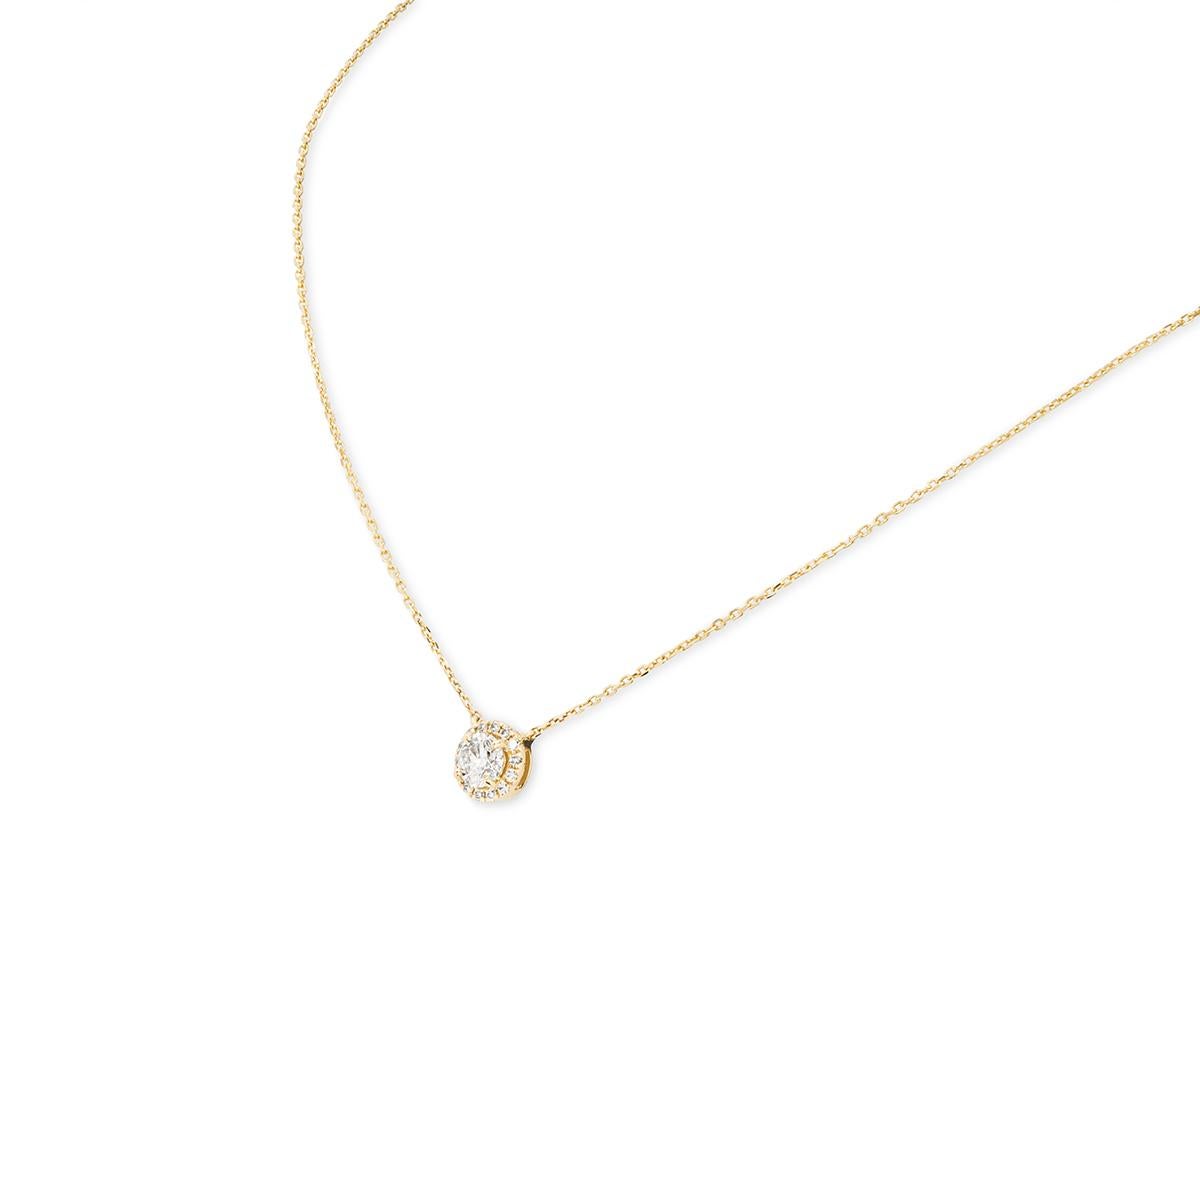 An enchanting 18k yellow gold diamond pendant. Set to the centre of the pendant is a round brilliant cut diamond with an approximate weight of 0.53ct, H colour and SI2 clarity. Accentuating the centre diamond is a halo composed of 14 round brilliant